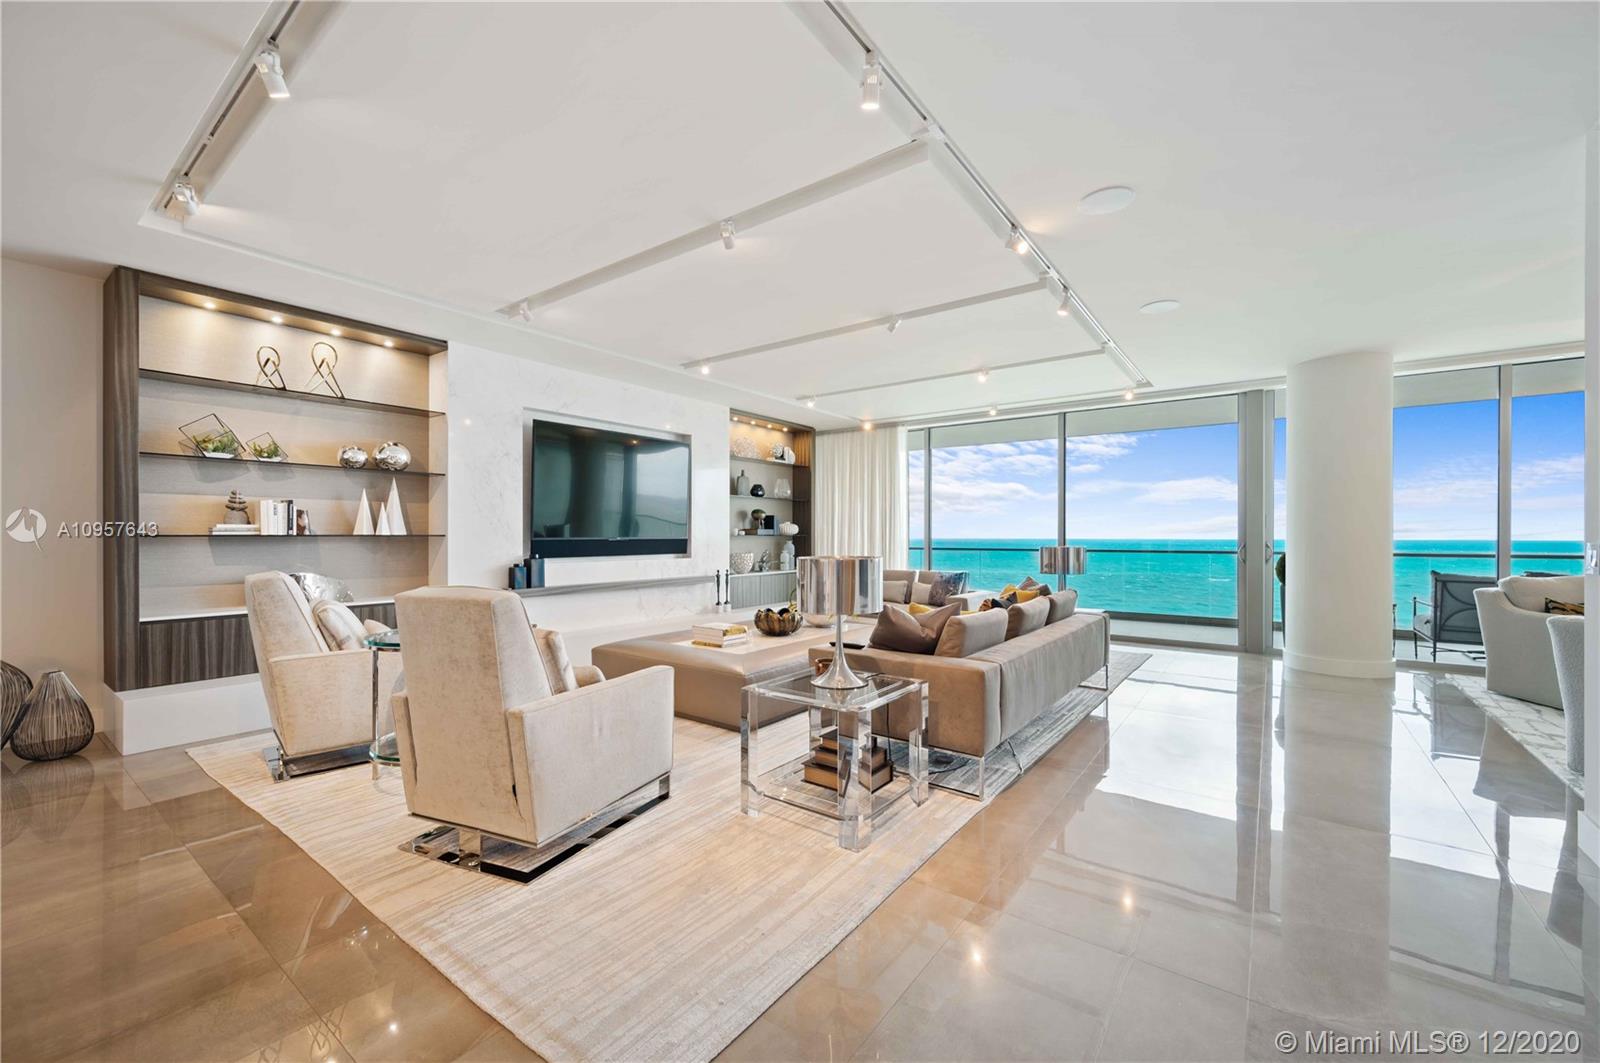 Photo 1 of Oceana Bal Harbour South Apt 1706 in Bal Harbour - MLS A10957643